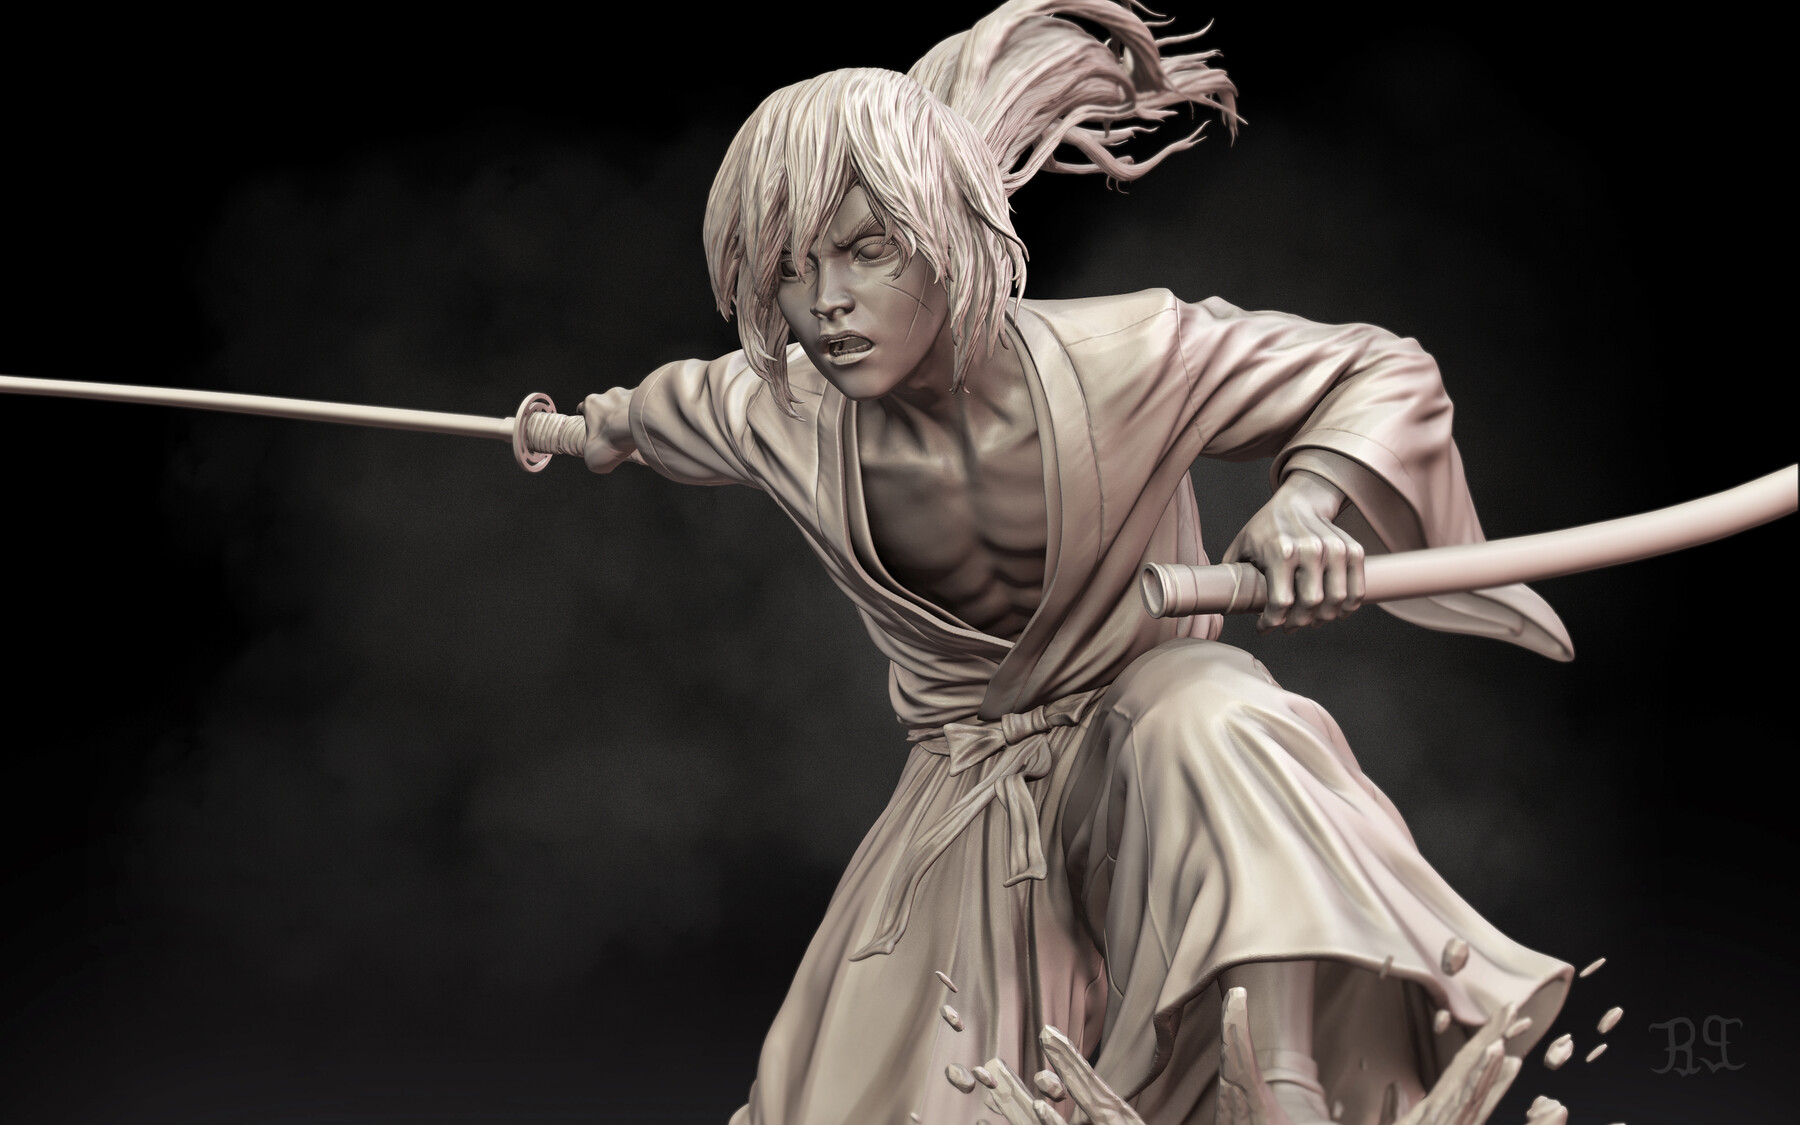 Dtninja831 - Here is a new illustration of Kenshin Himura! Source